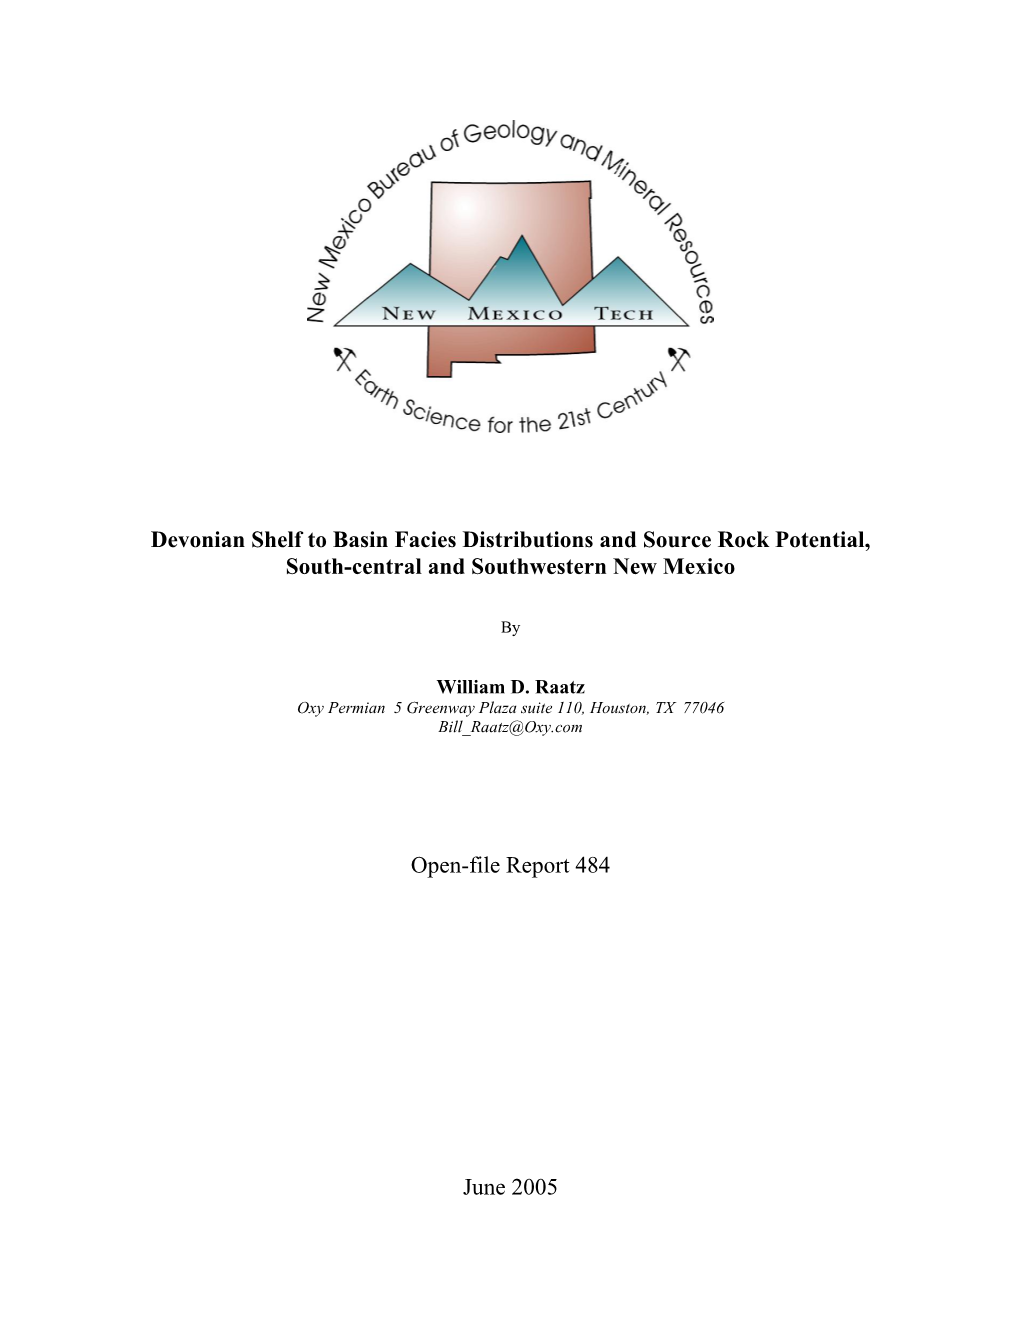 Devonian Shelf to Basin Facies Distributions and Source Rock Potential, South-Central and Southwestern New Mexico